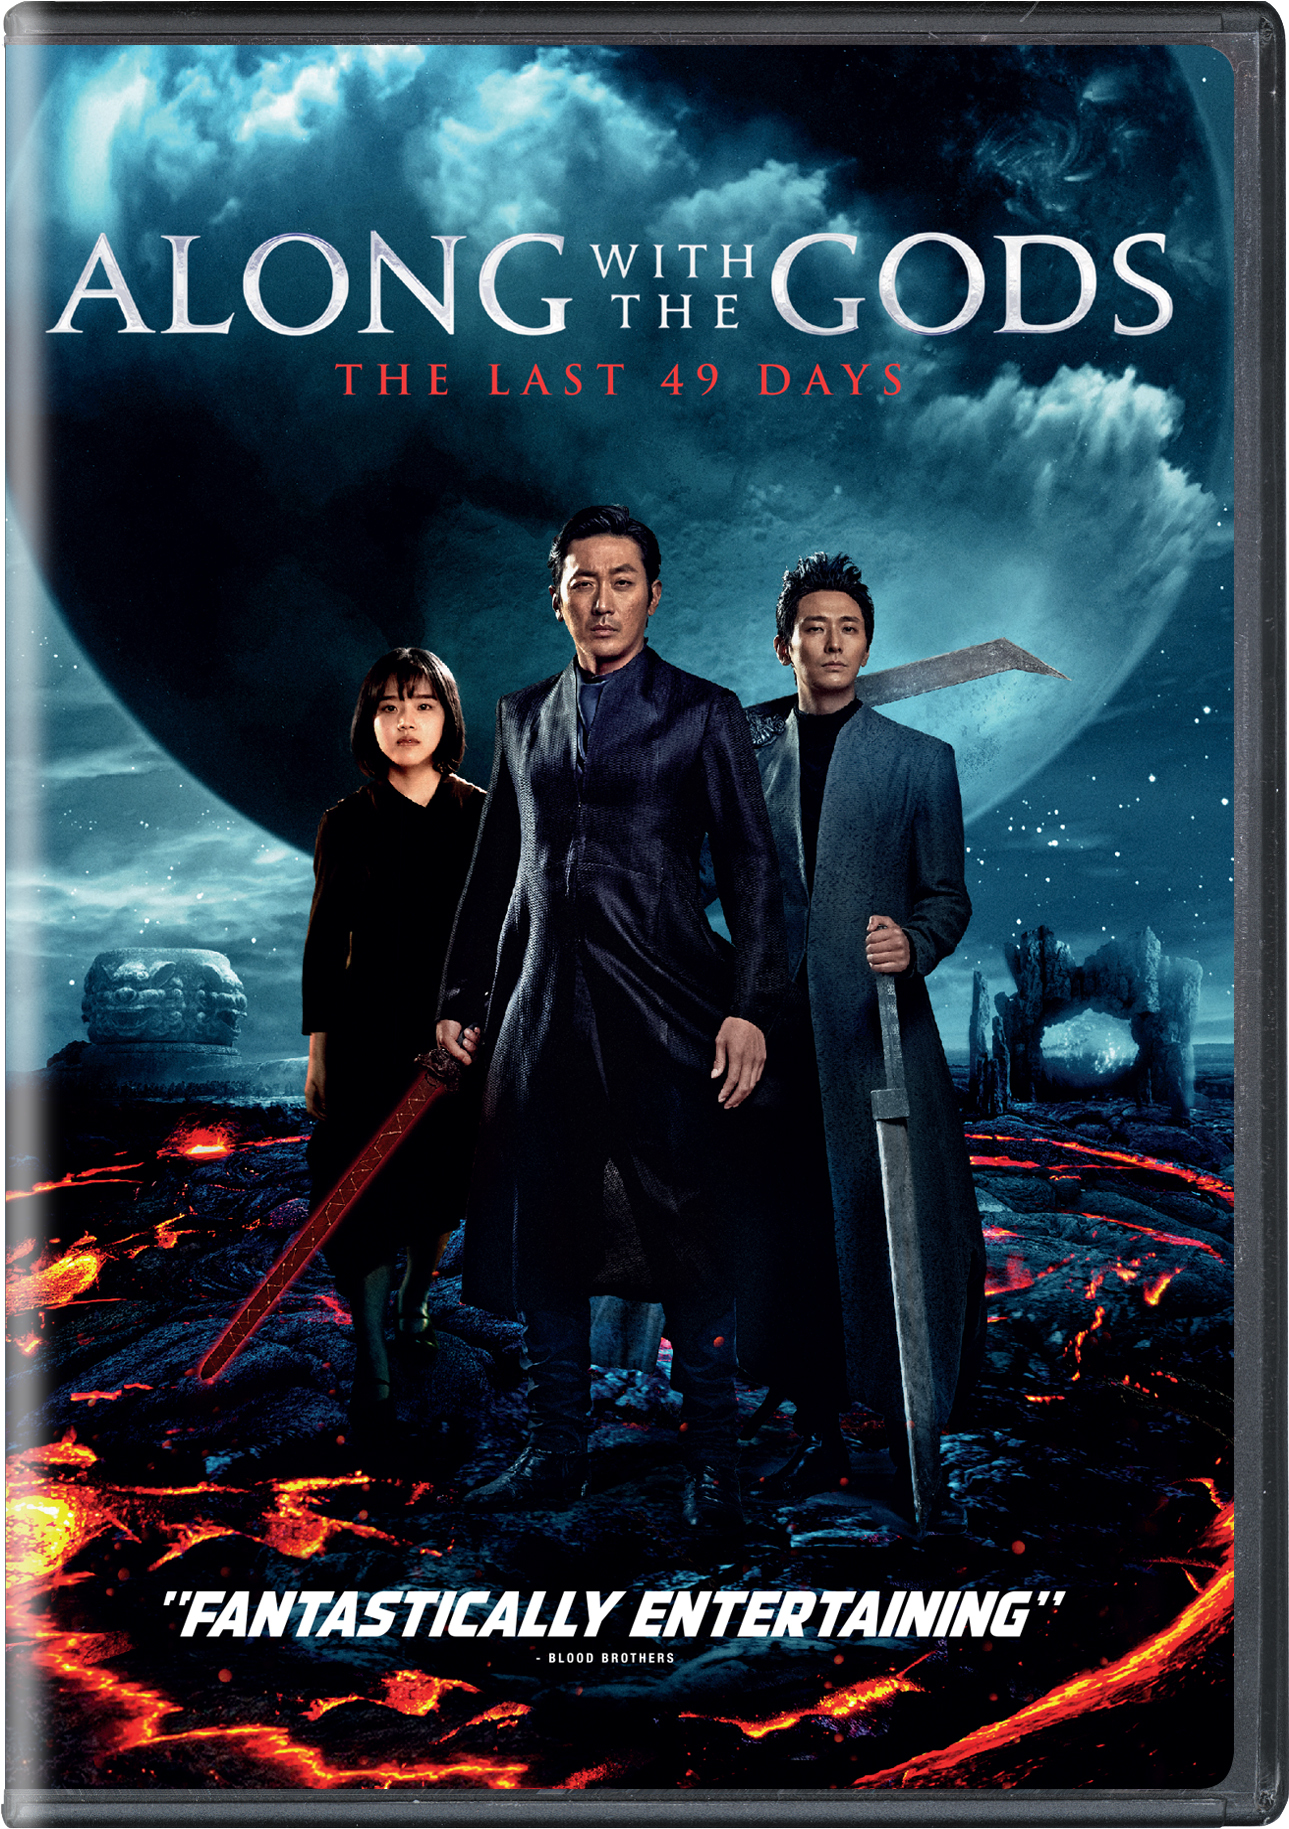 Along With The Gods - The Last 49 Days - DVD [ 2018 ]  - Foreign Movies On DVD - Movies On GRUV